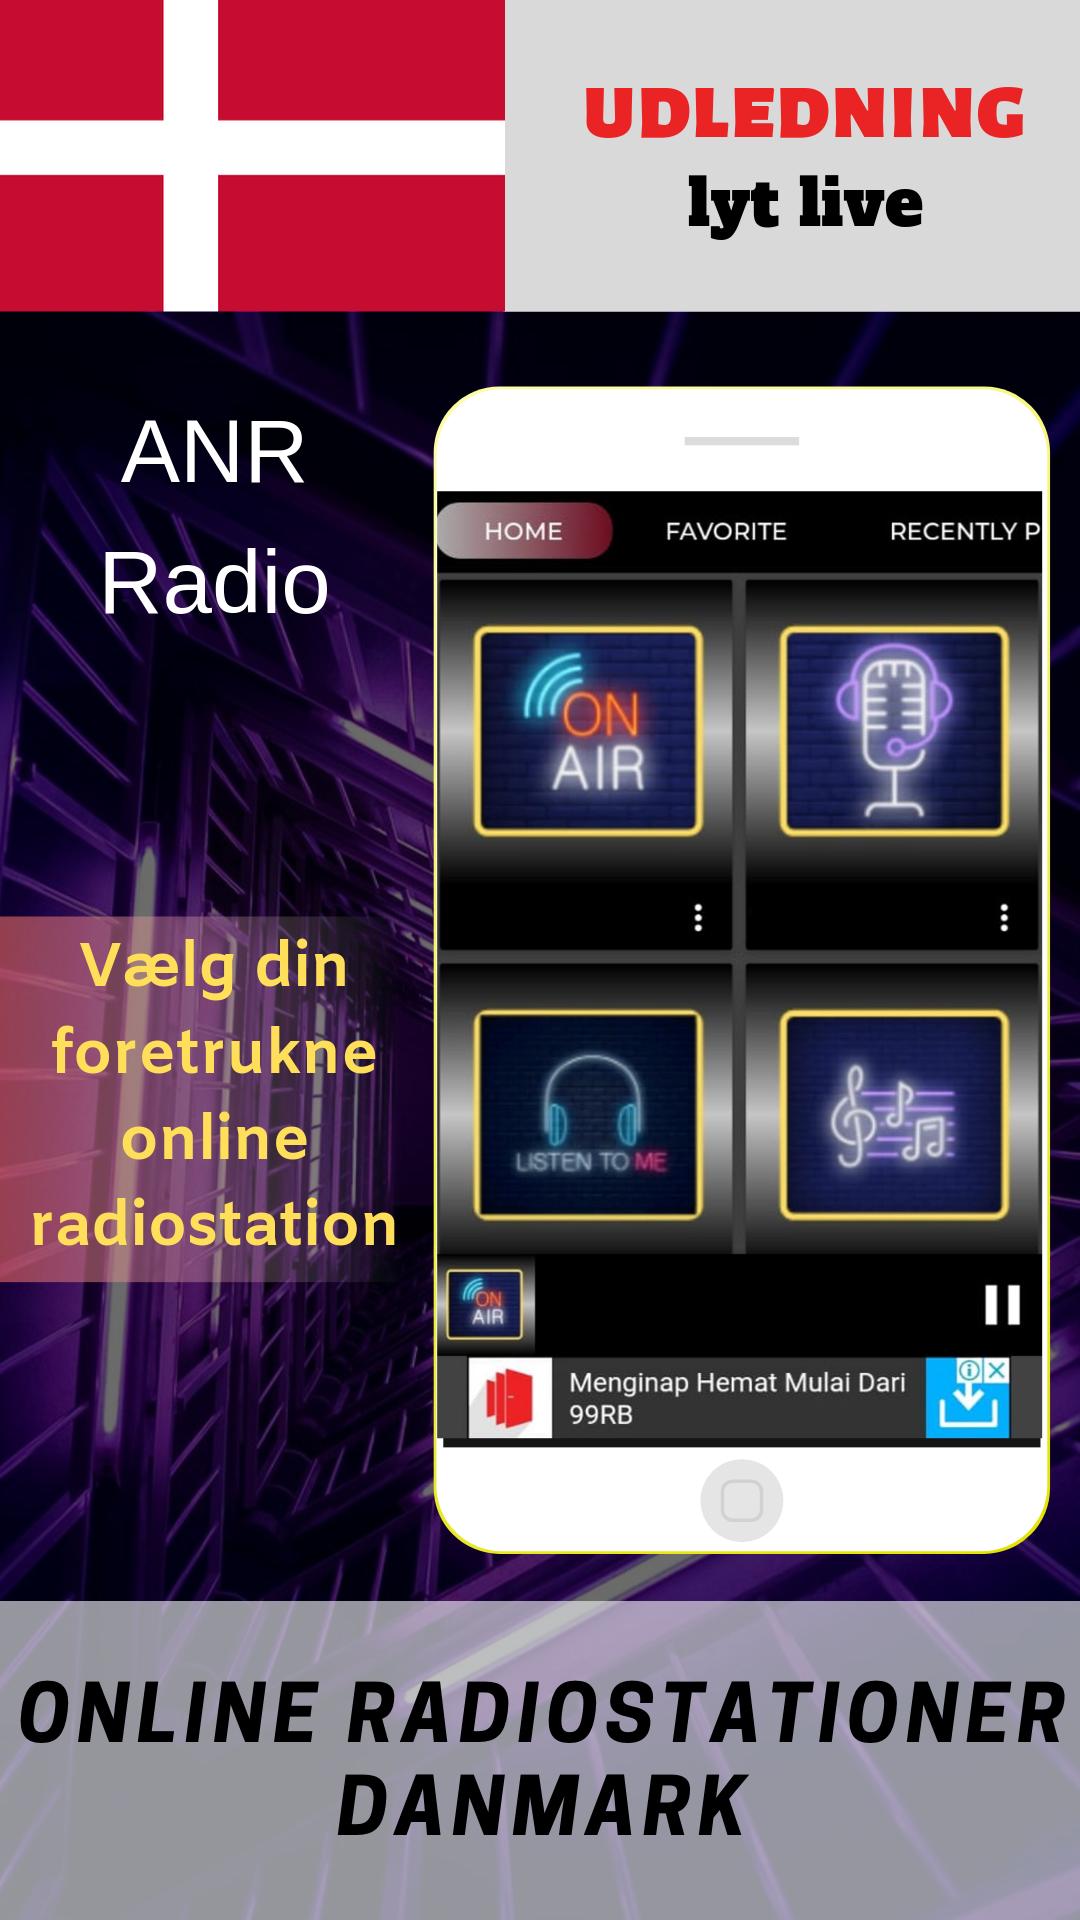 ANR Radio for Android - APK Download